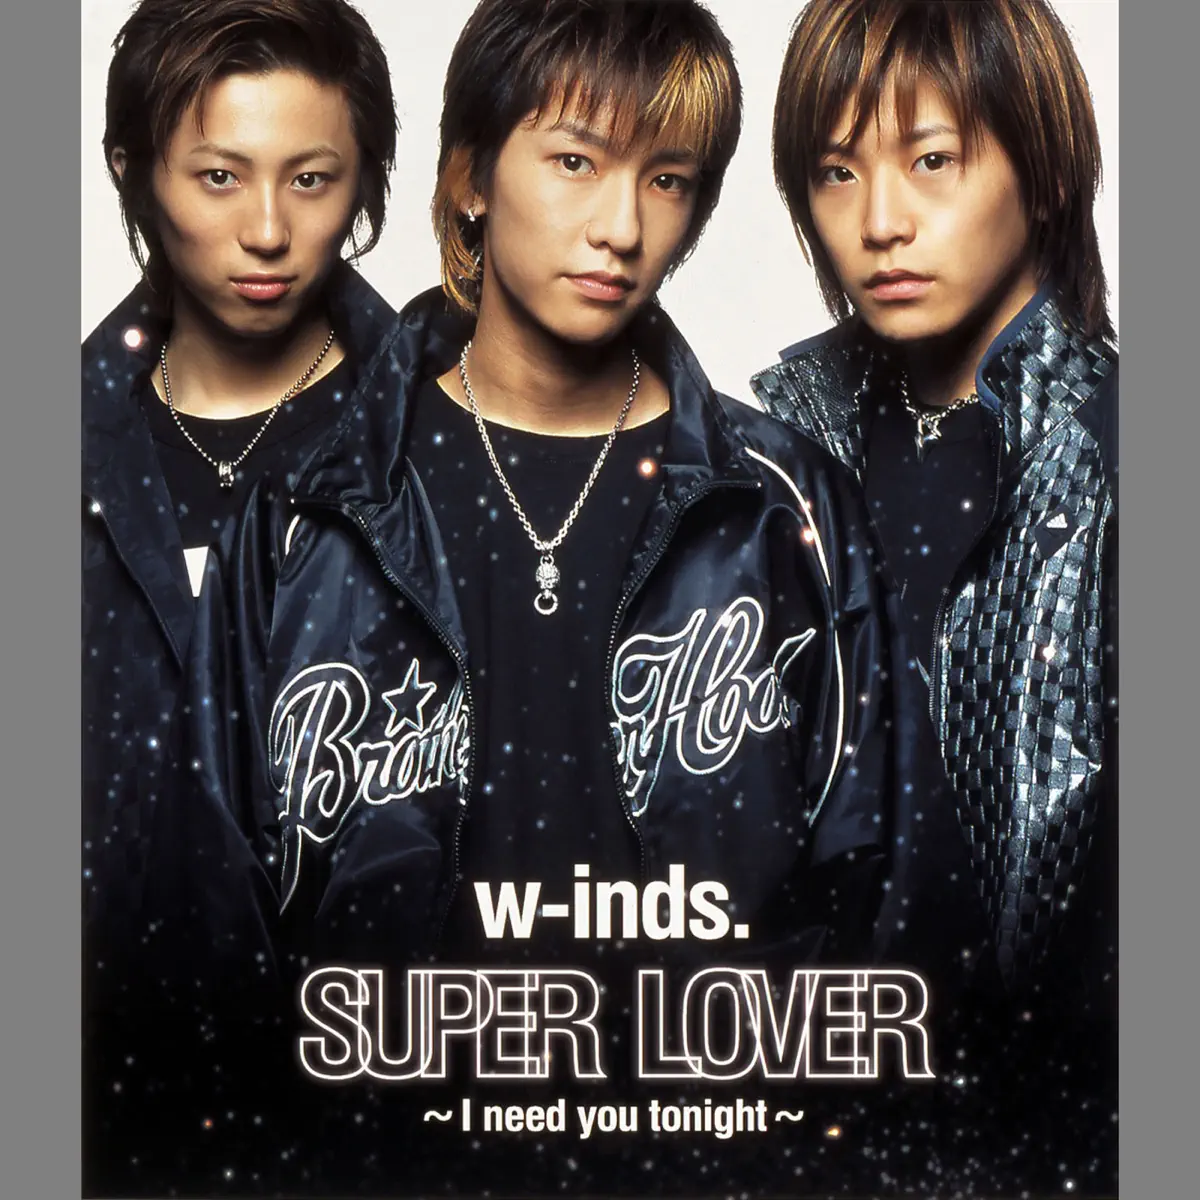 w-inds. - Super Lover - I NeED You Tonight - - EP (2003) [iTunes Plus AAC M4A]-新房子